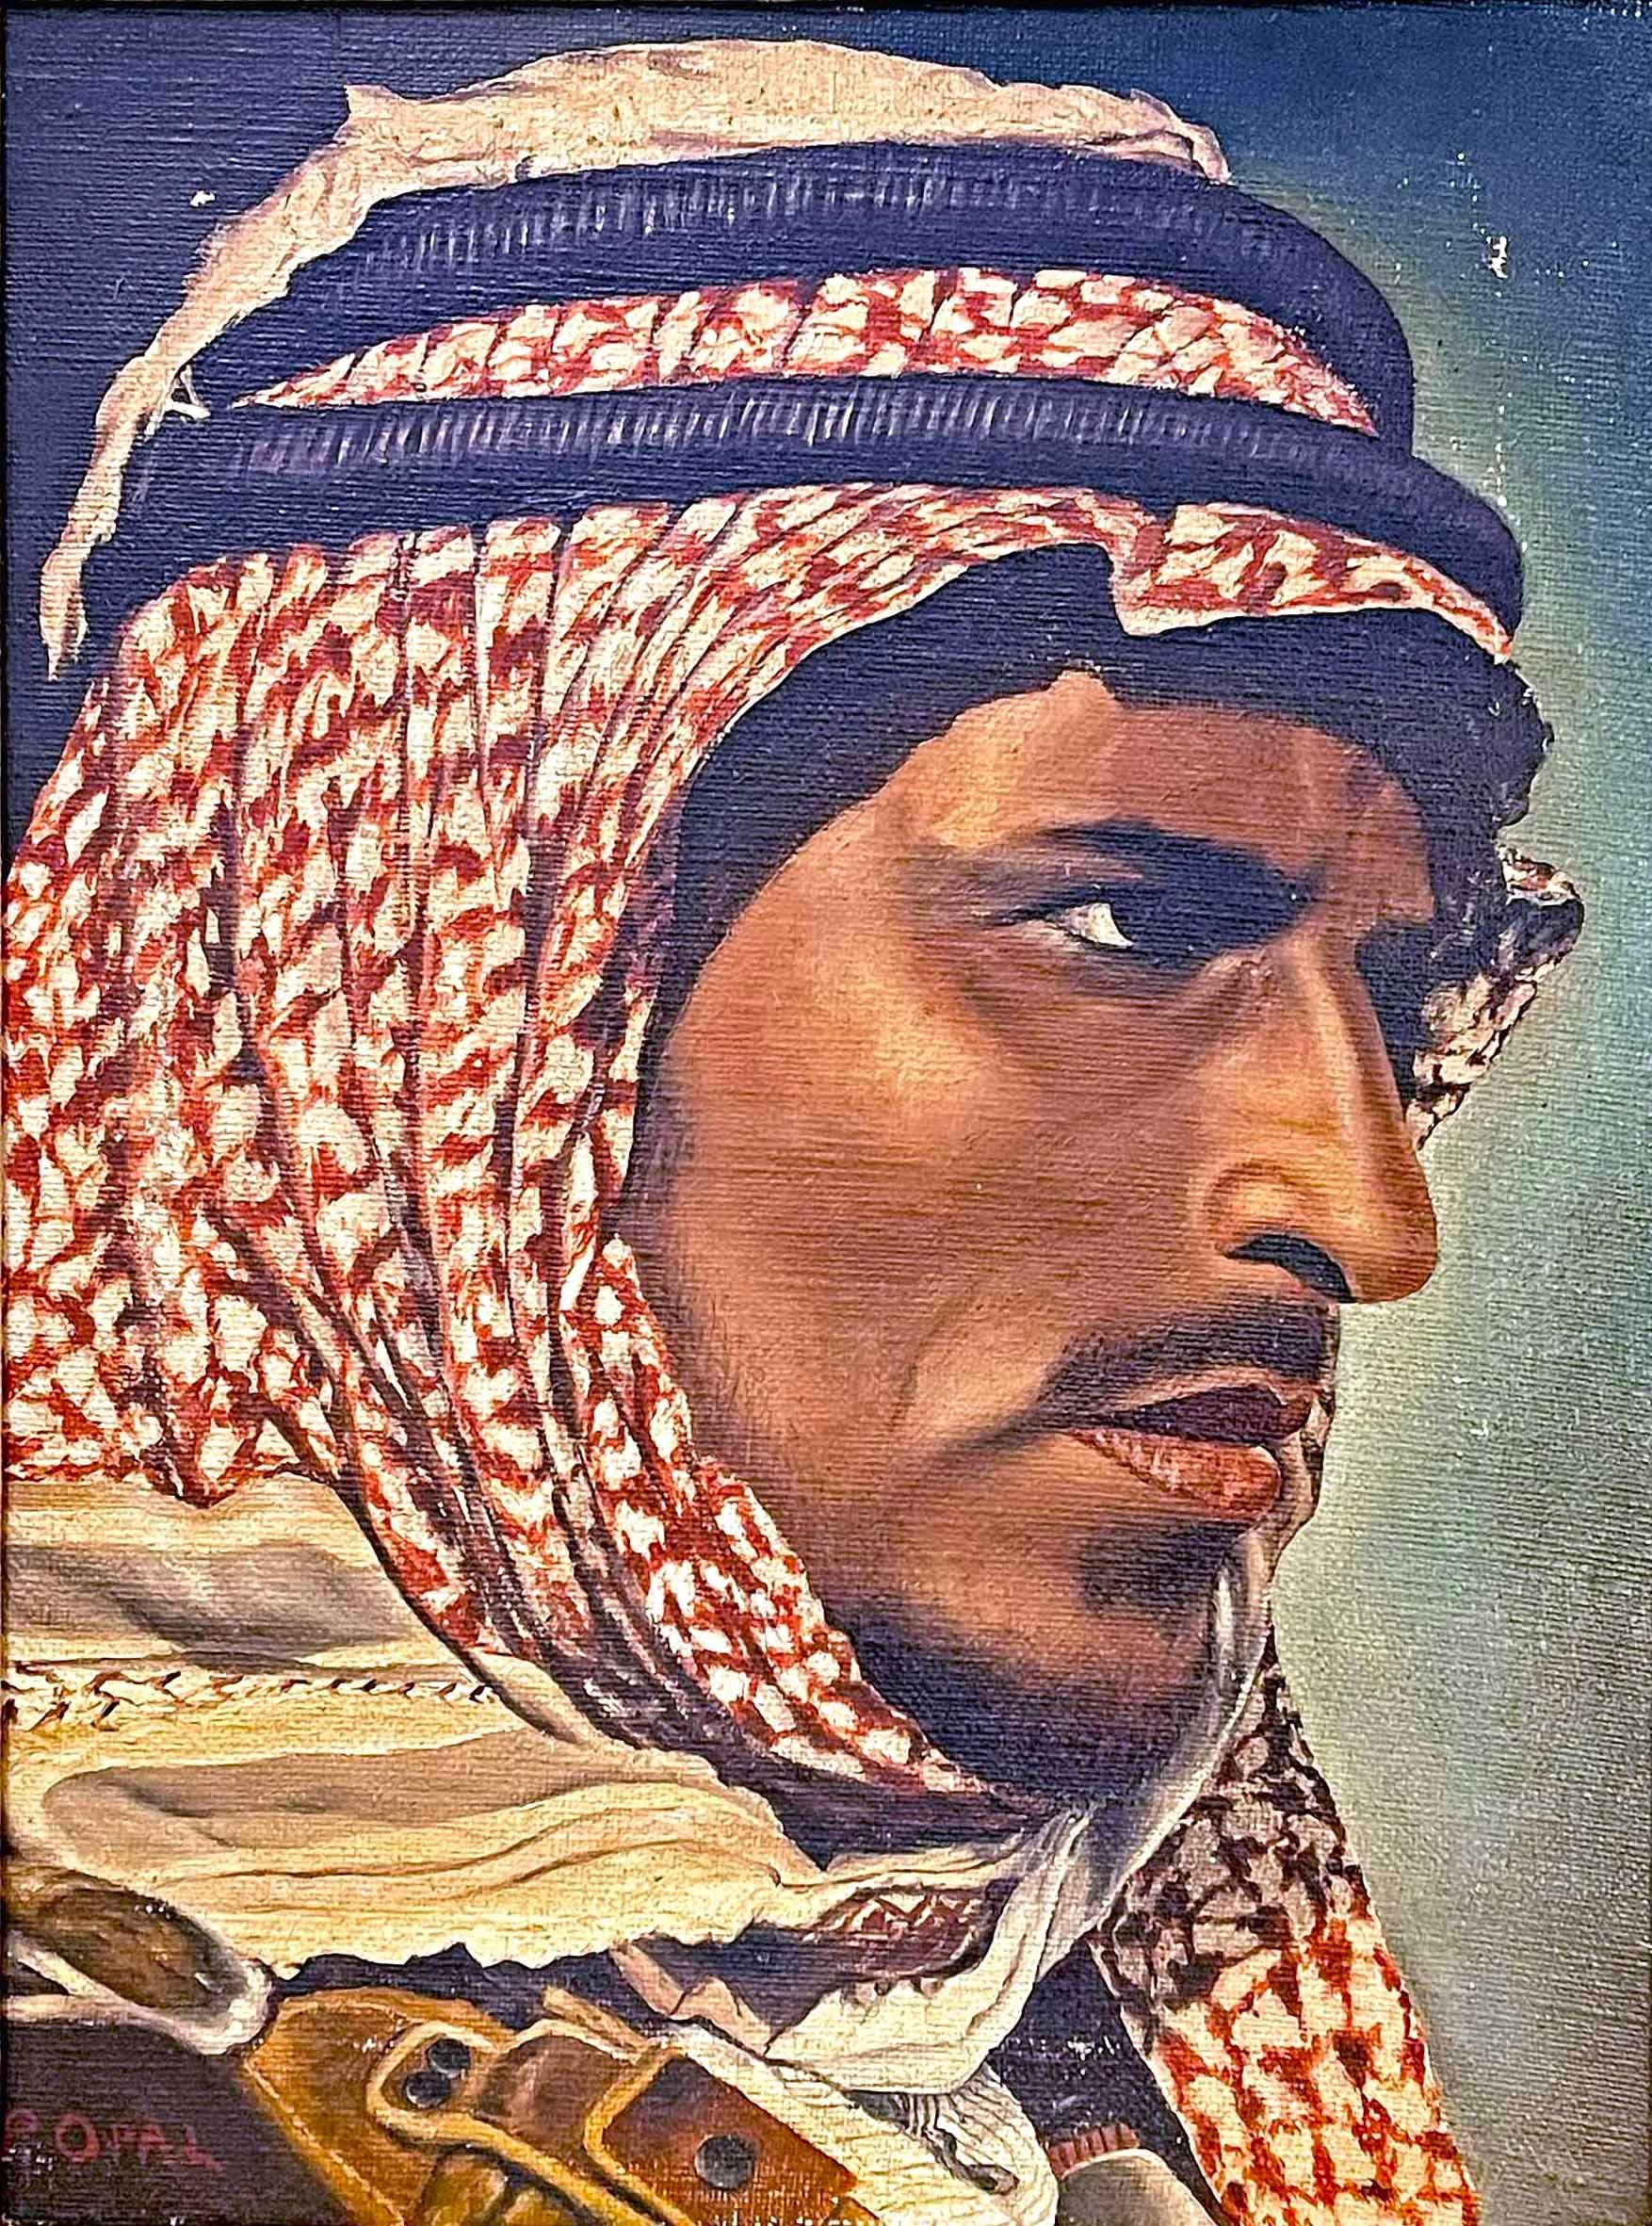 Painted toward the end of the Great Depression, this striking portrait of a handsome bedouin with a traditional headdress featuring a red and white keffiyeh, was painted by Peter Opal. Little is known about the artist, but his talent is obvious in